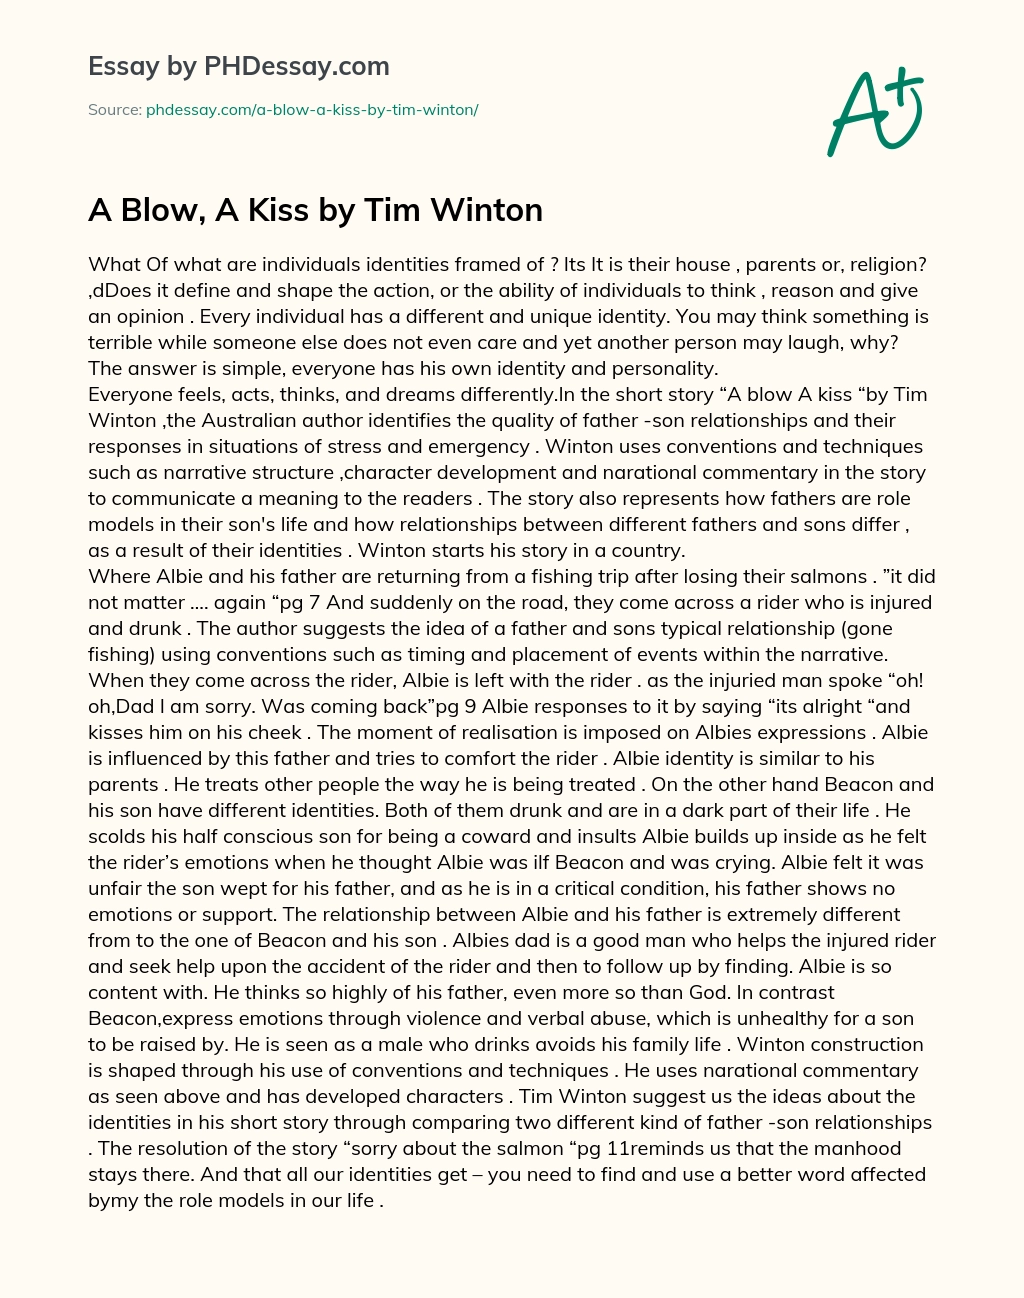 A Blow, A Kiss by Tim Winton essay